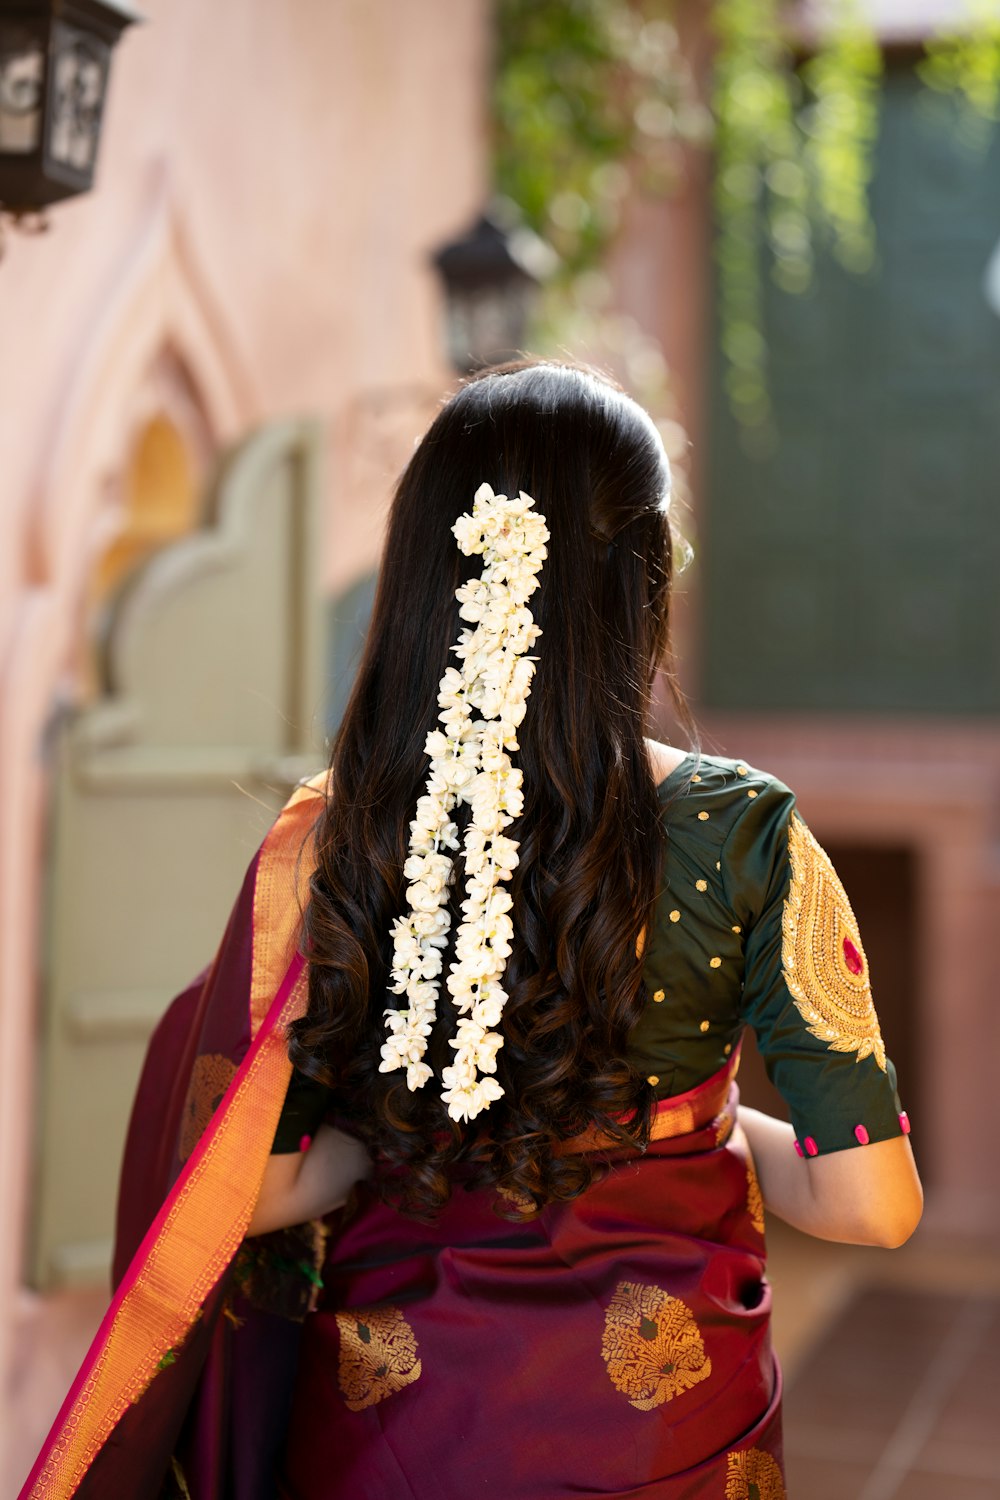 a woman wearing a traditional dress